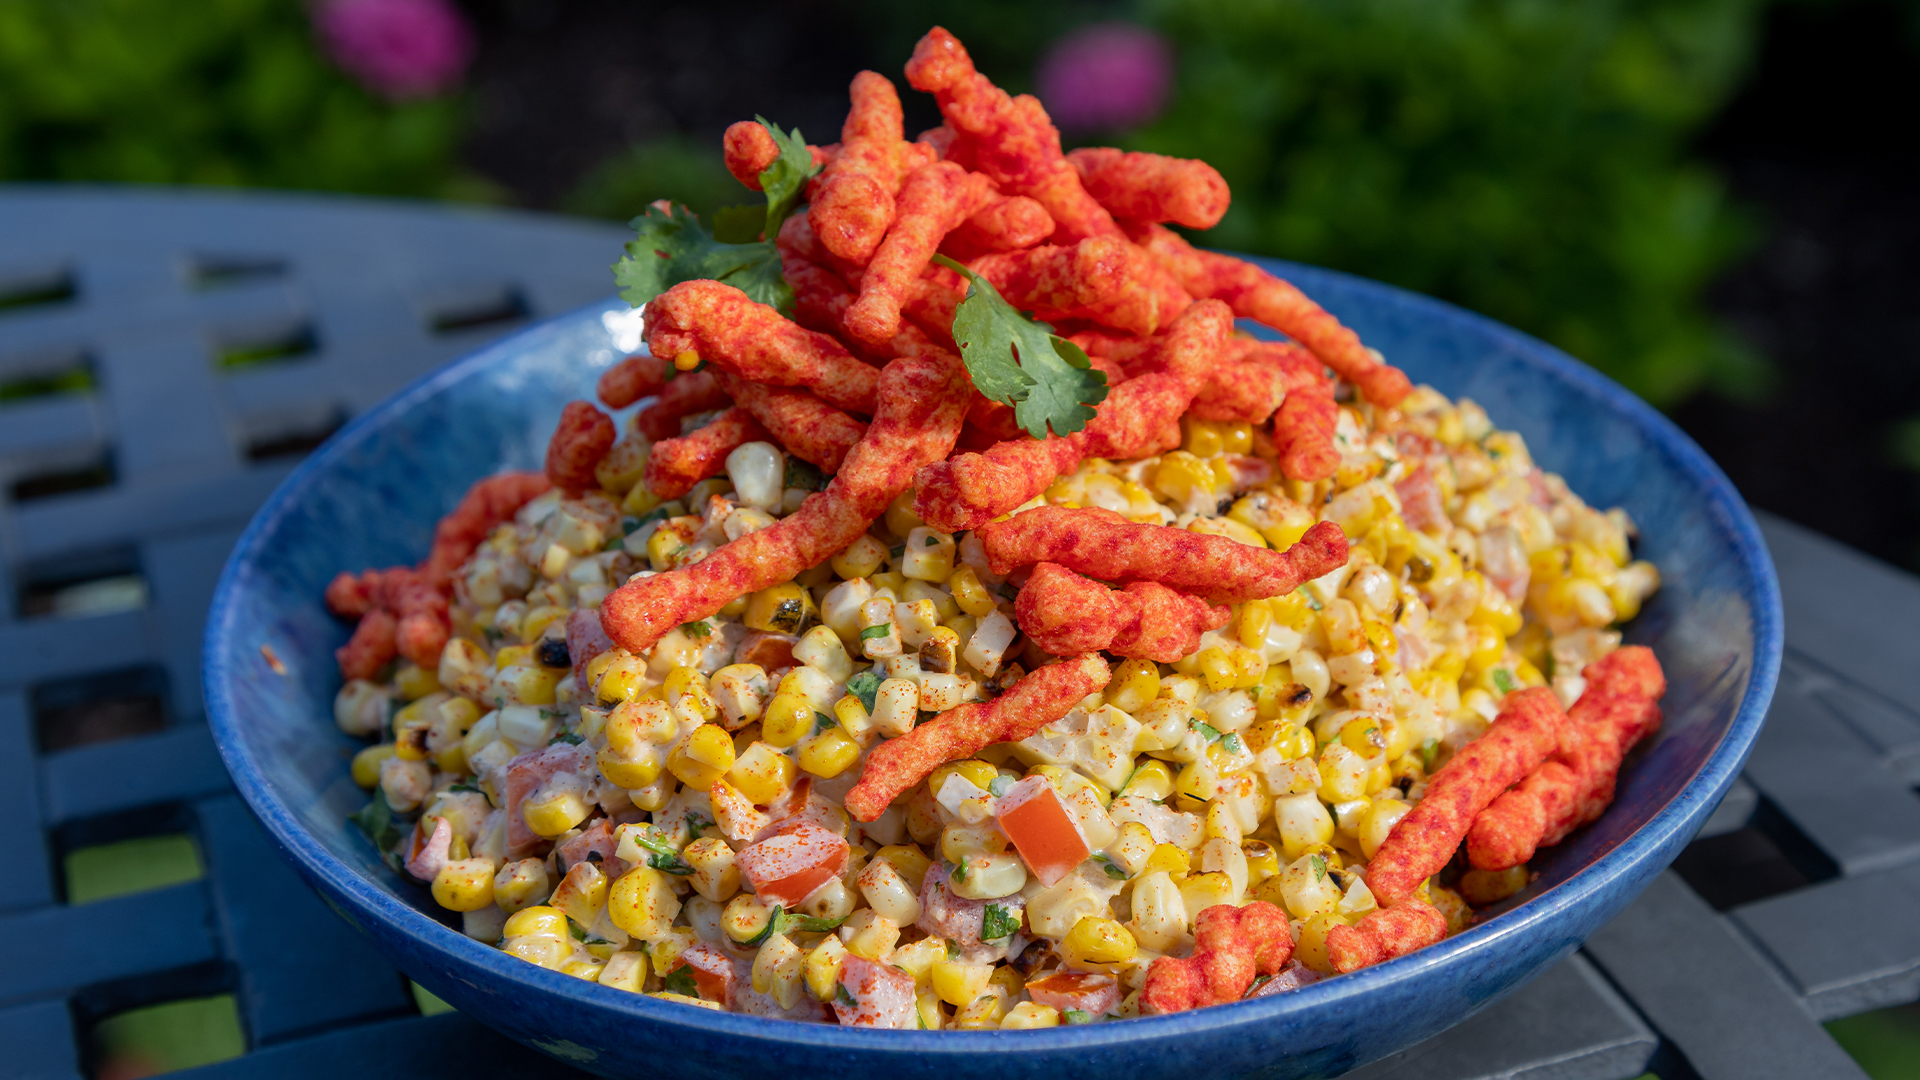 Grilled corn salad with a crunchy topping